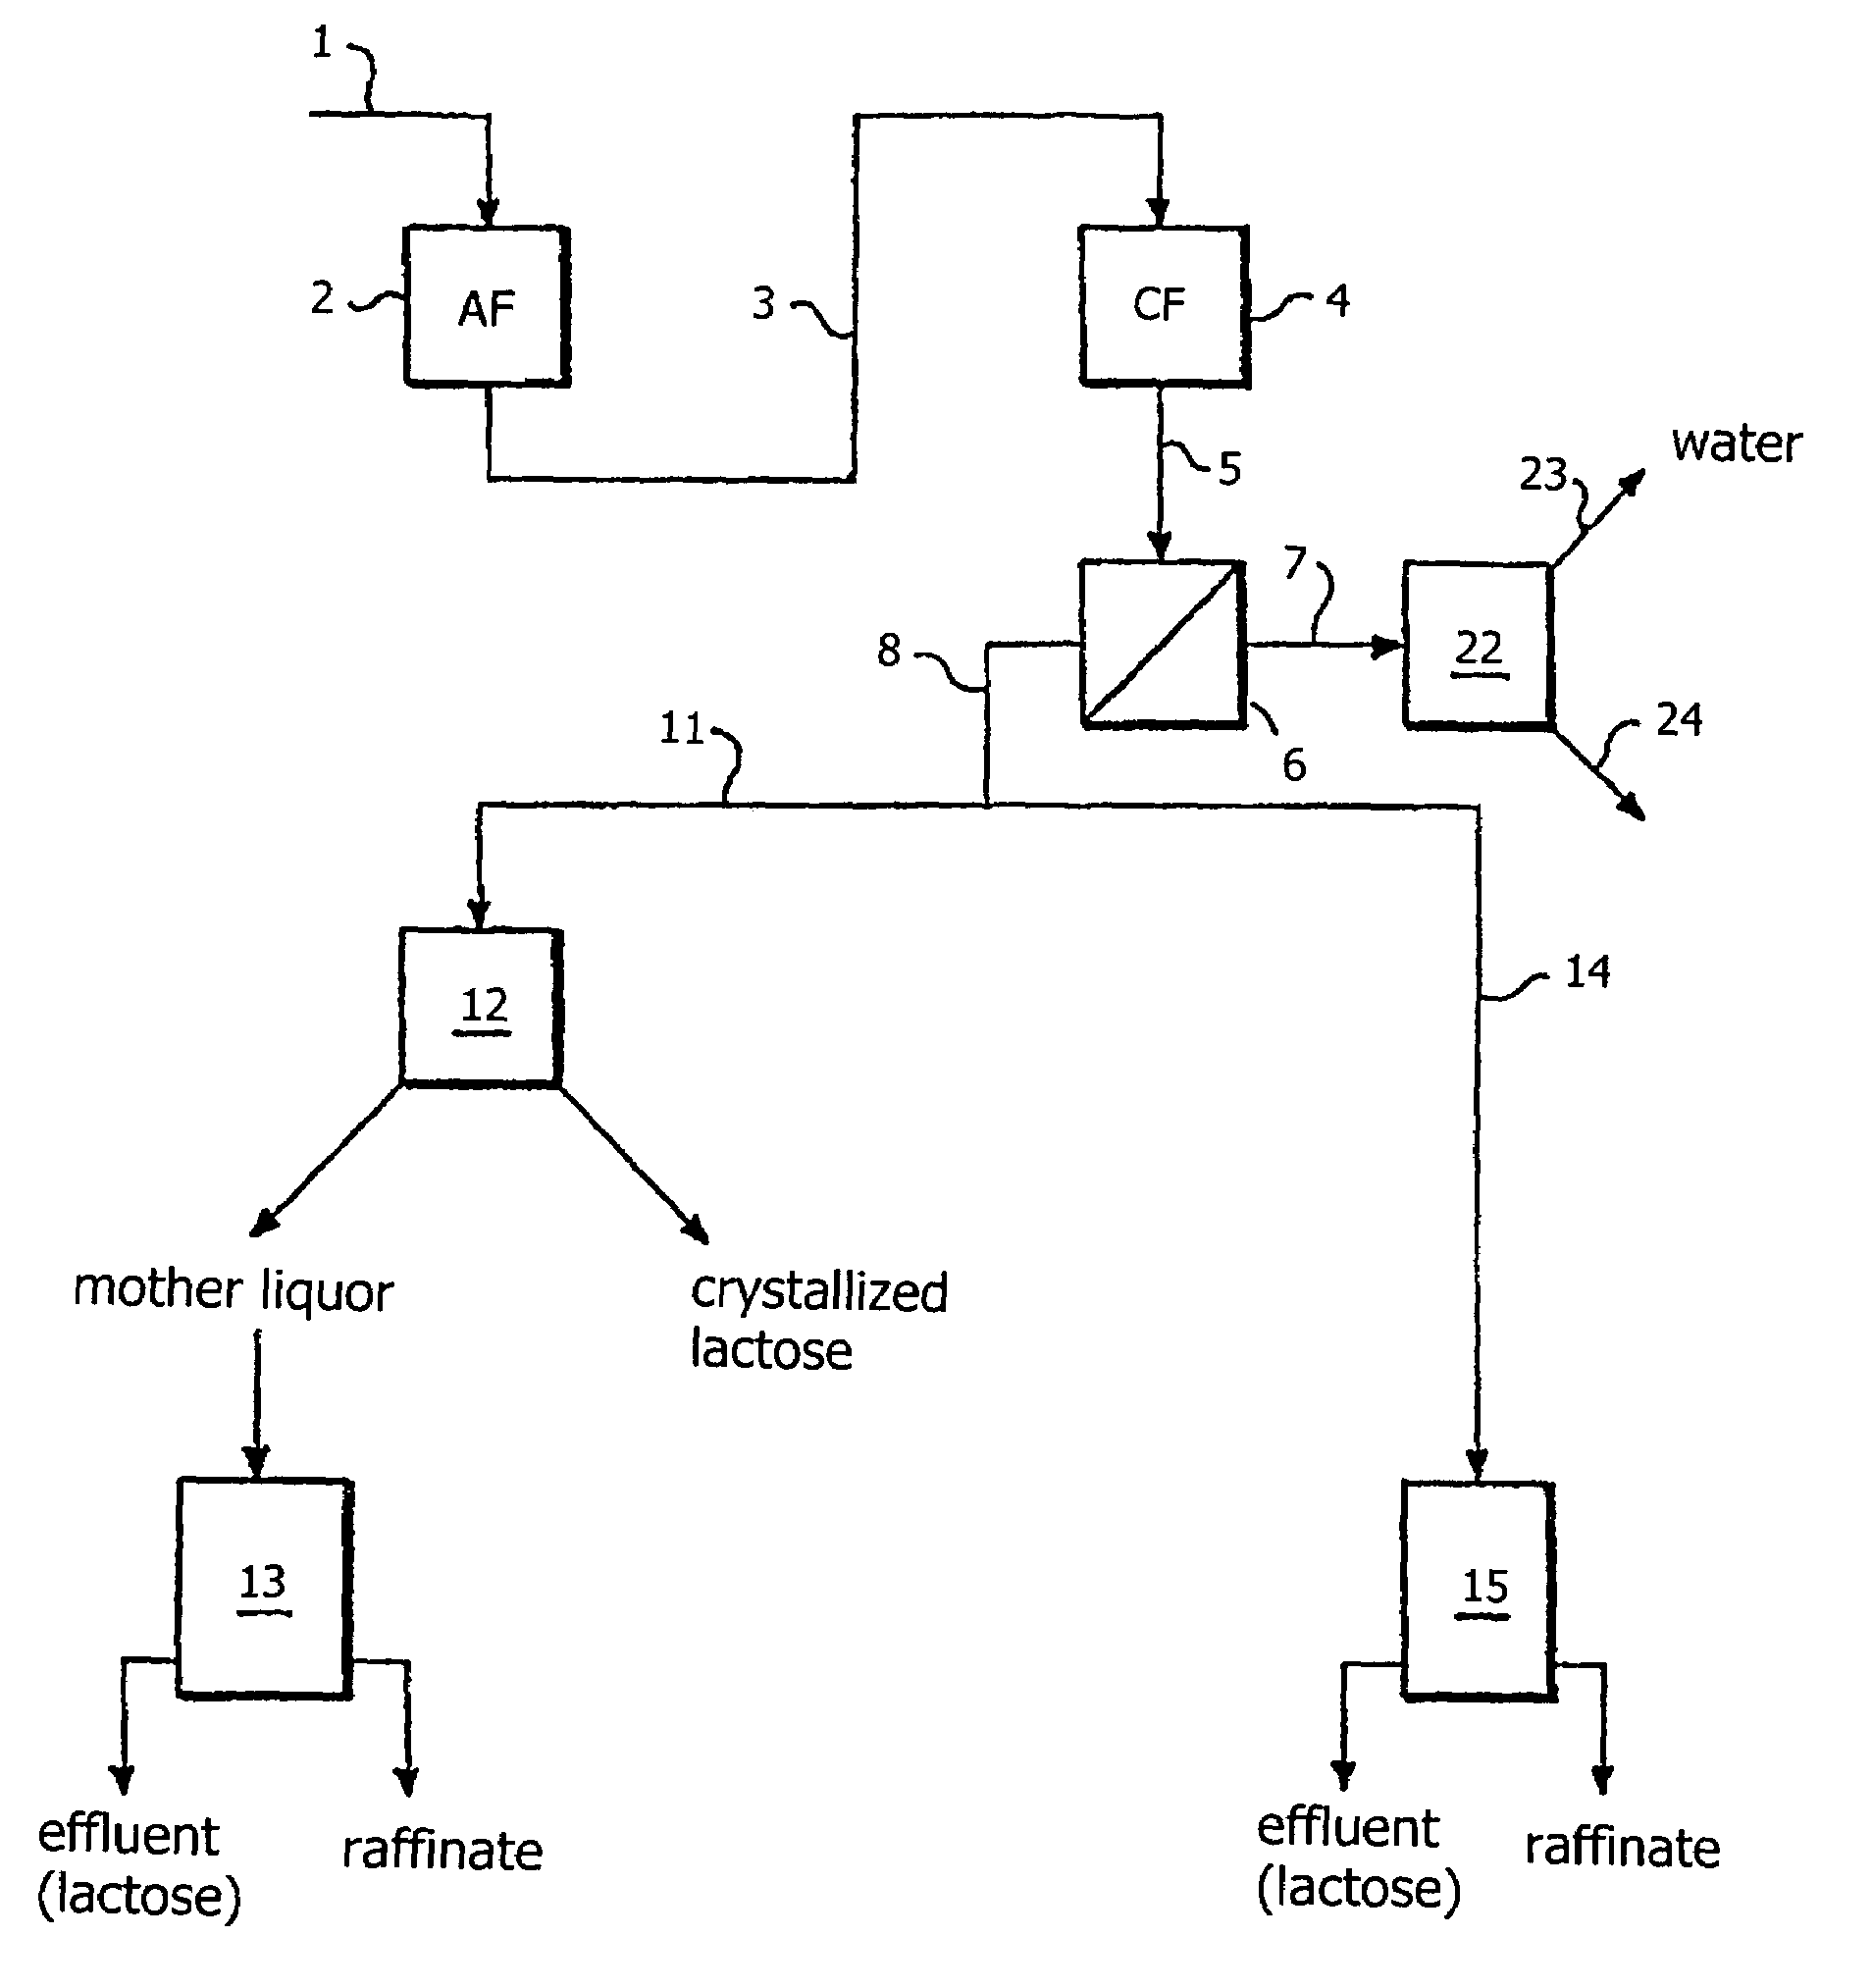 Method of preparing granulated sugar from an aqueous sugar solution containing monovalent and polyvalent anions and cations